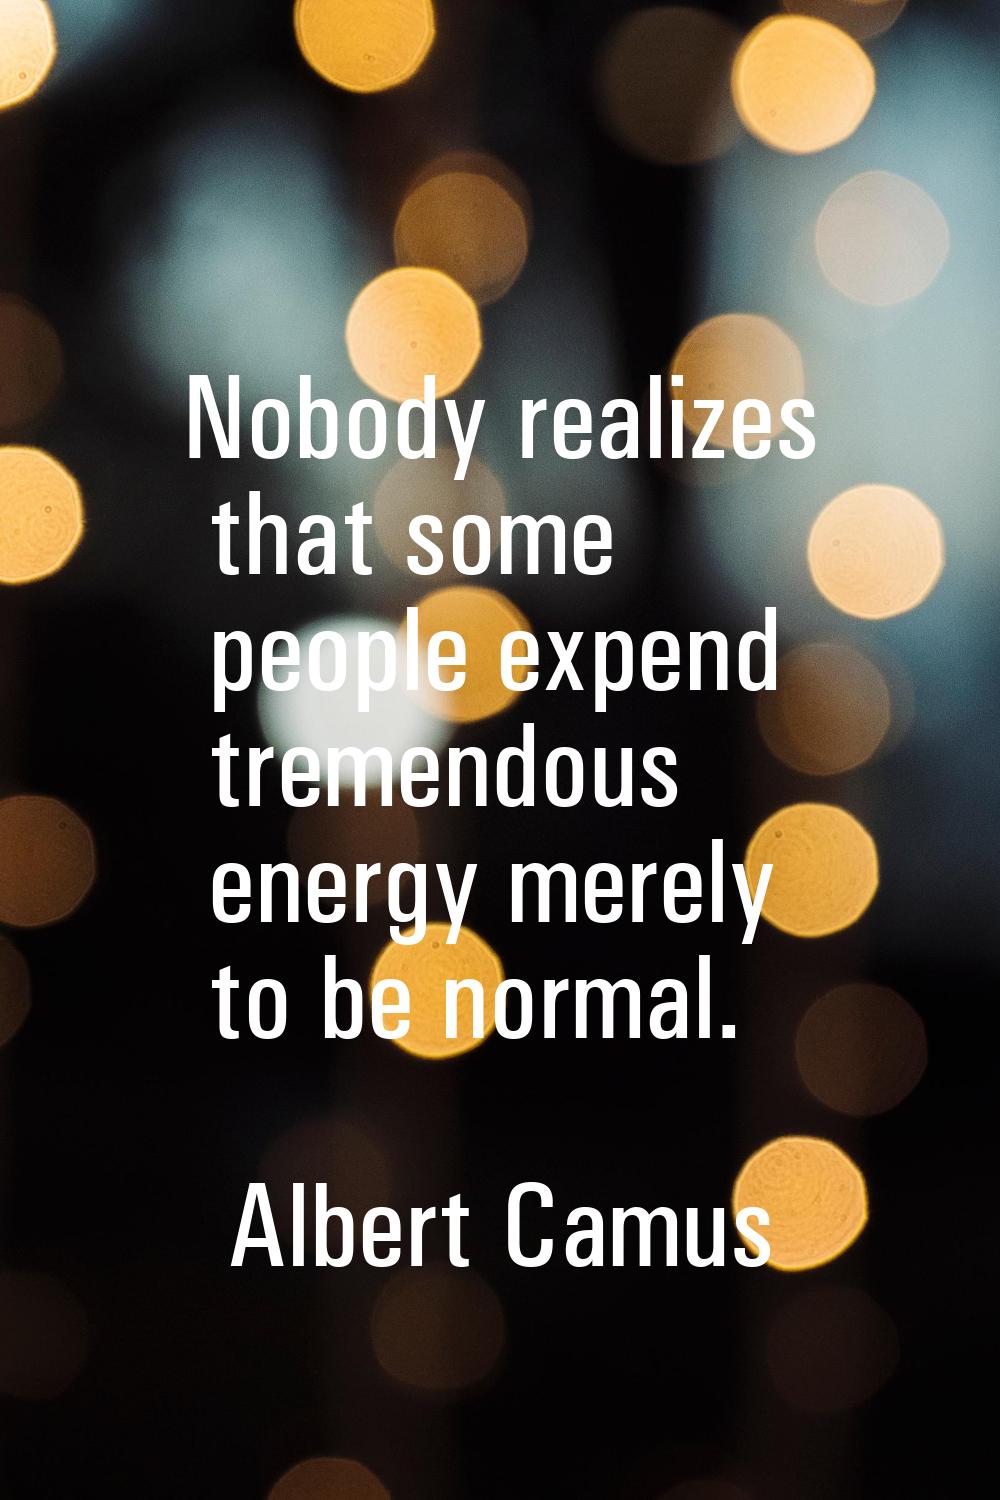 Nobody realizes that some people expend tremendous energy merely to be normal.